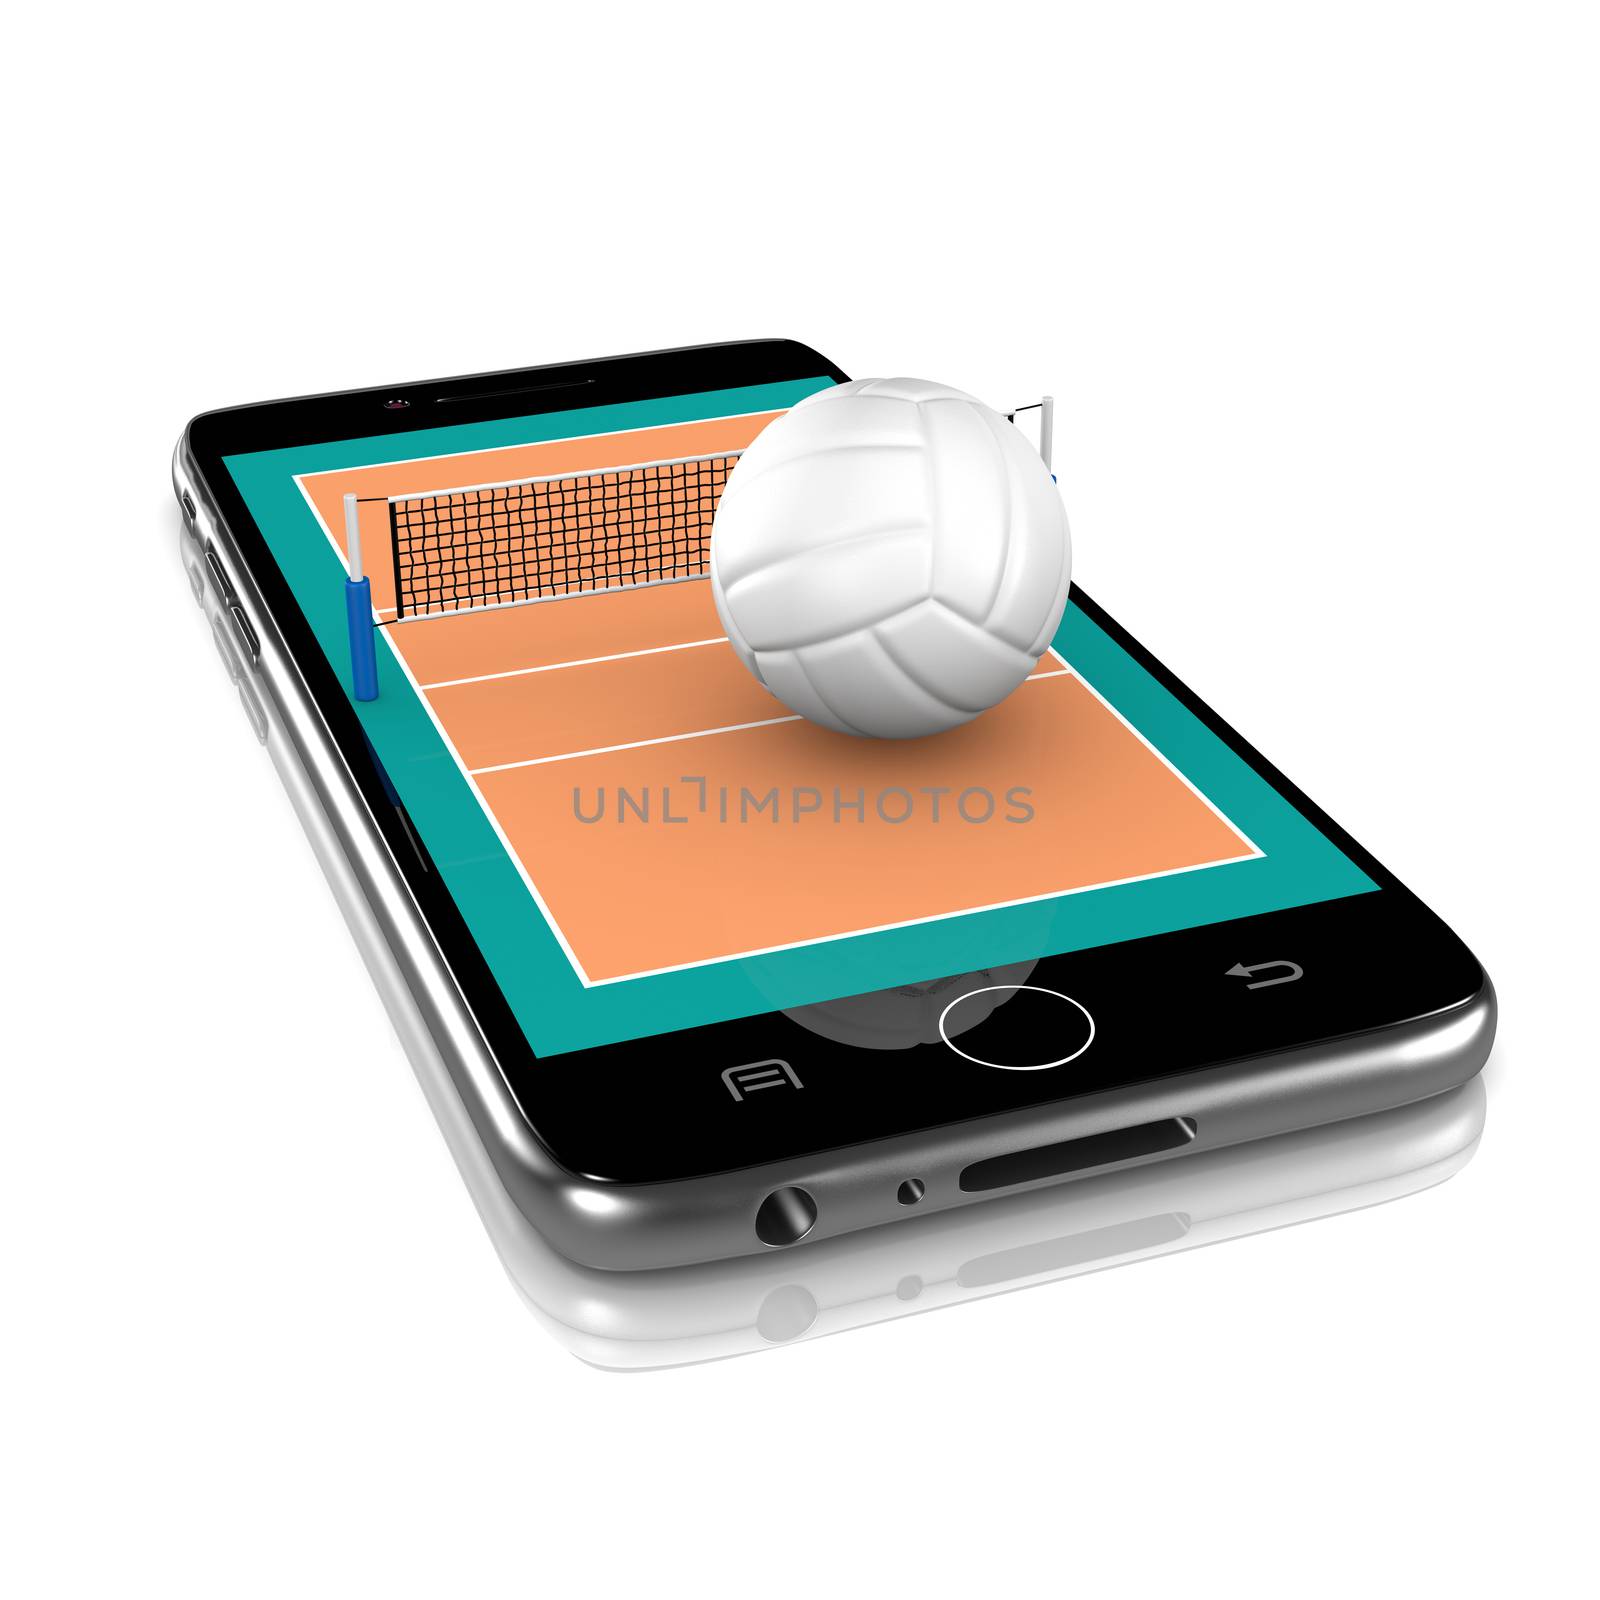 Volleyball on Smartphone, Sports App by make